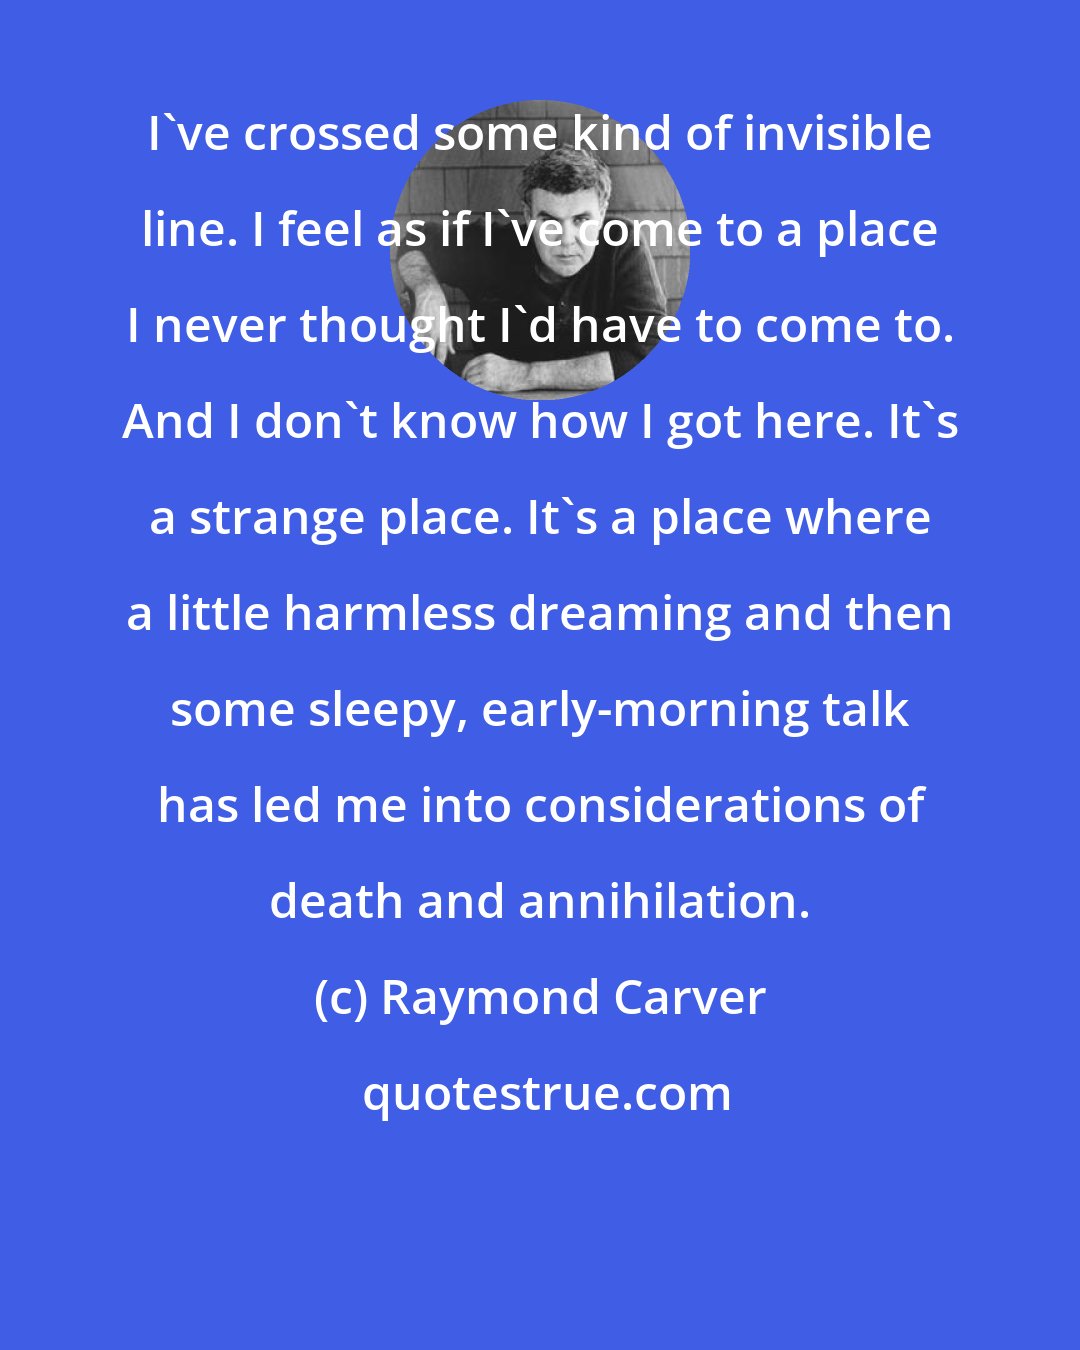 Raymond Carver: I've crossed some kind of invisible line. I feel as if I've come to a place I never thought I'd have to come to. And I don't know how I got here. It's a strange place. It's a place where a little harmless dreaming and then some sleepy, early-morning talk has led me into considerations of death and annihilation.